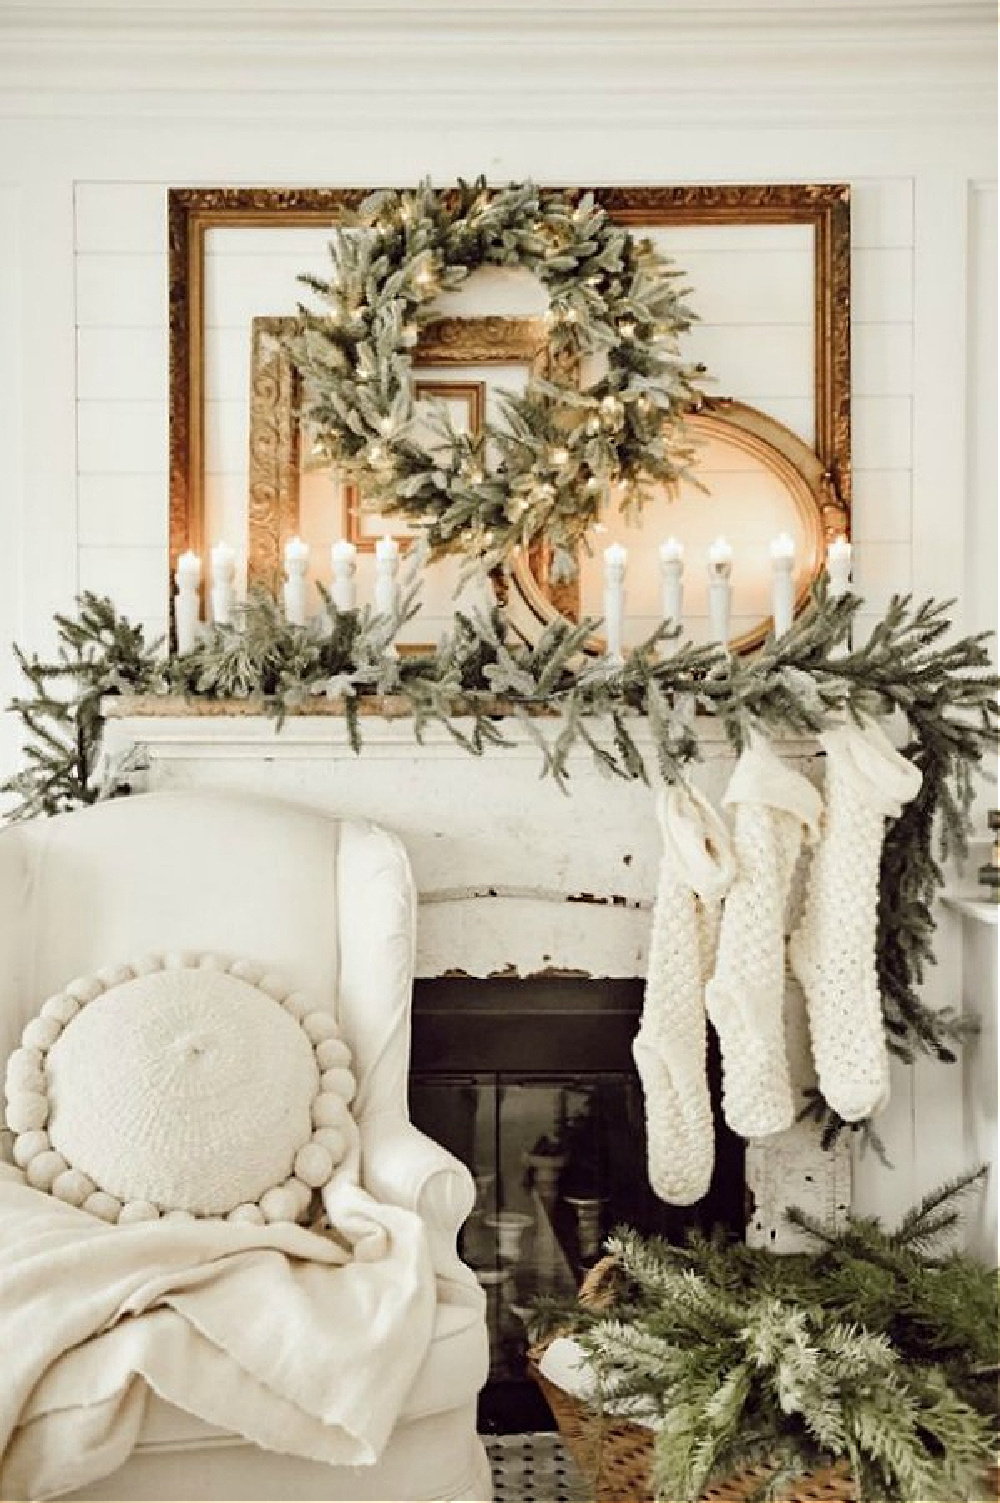 Fraser Firs, Balsam Trees, and Chunky Knit Stockings... are your holiday cozy feels going crazy yet? Liz Marie Blog's stunning farmhouse white Christmas decorated fireplace mantel.